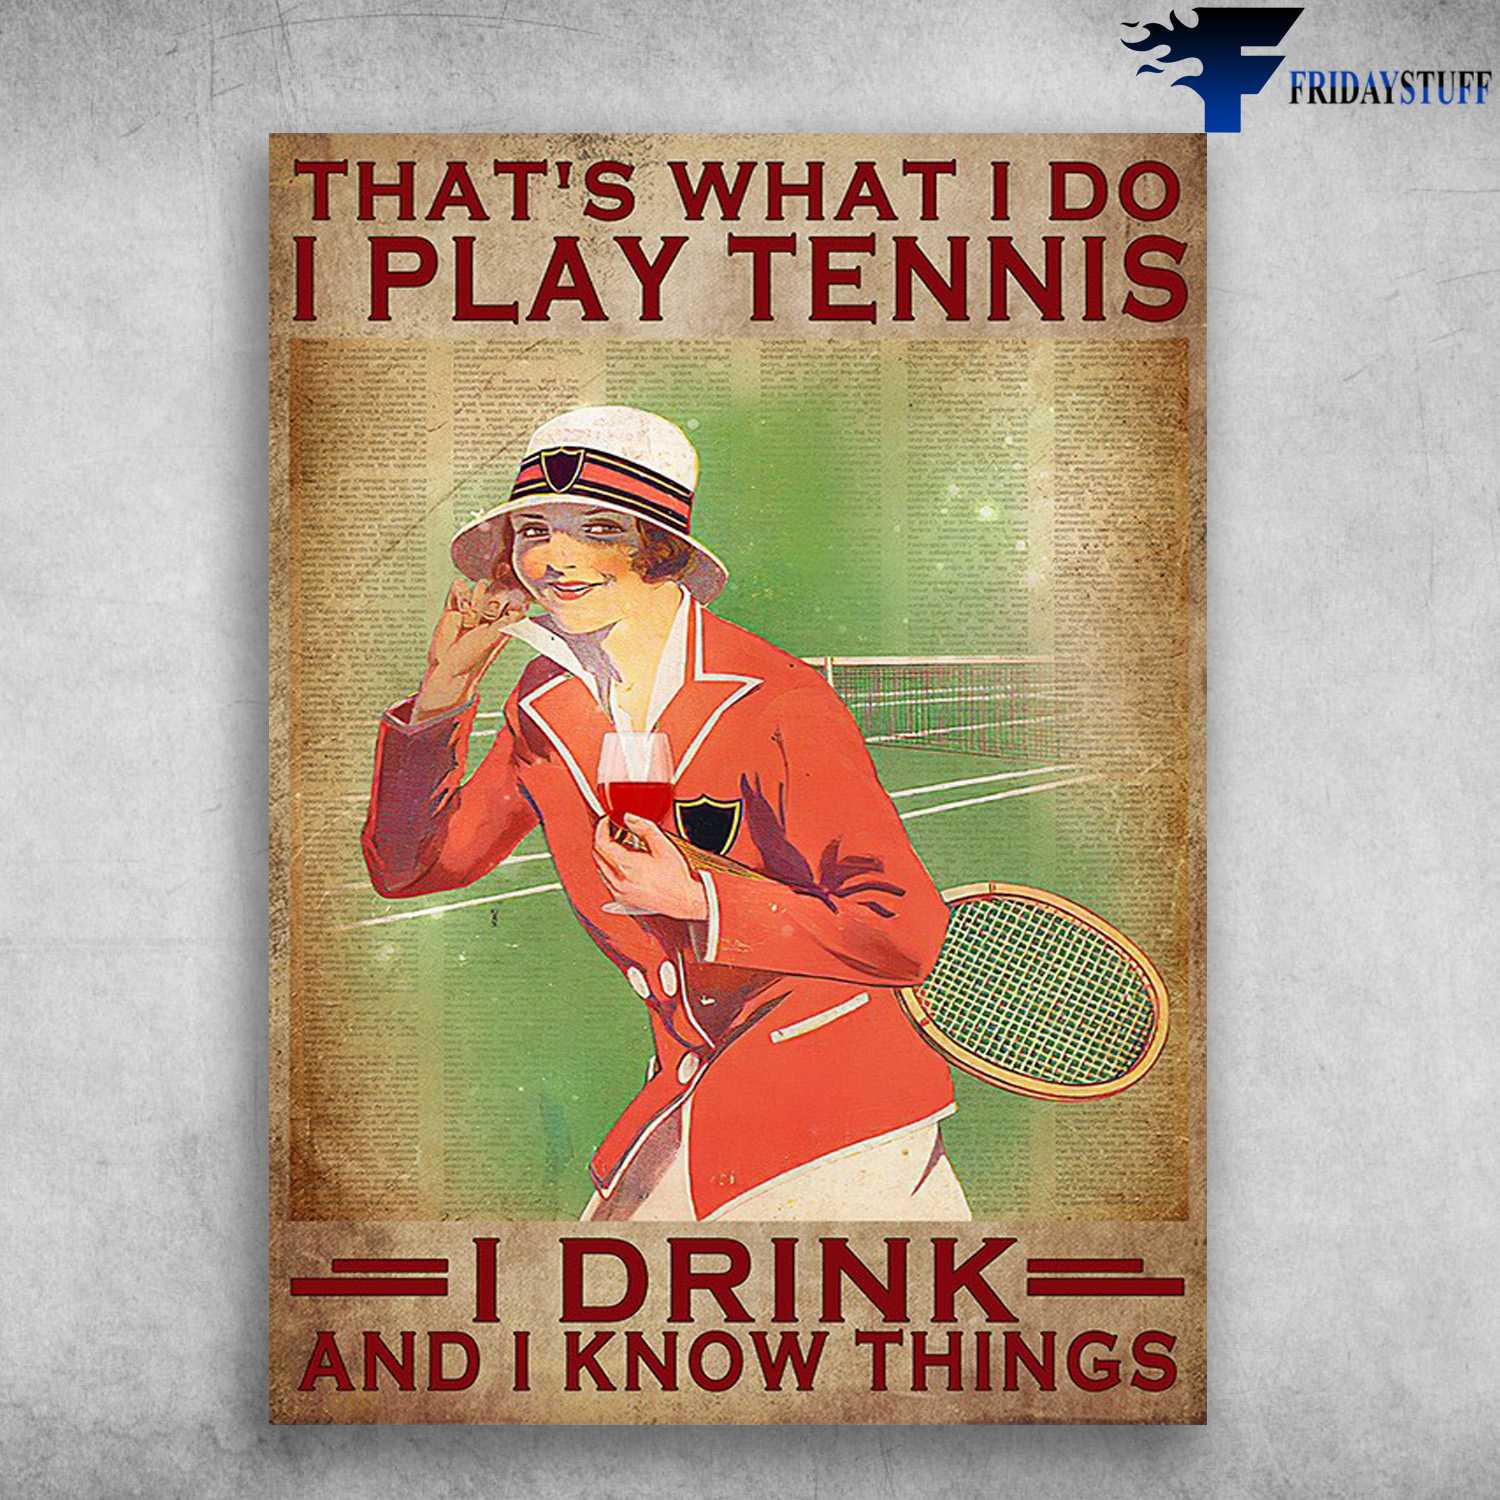 Tennis And Wine - That What's I Do, I Play Tennis, I Drink, And I Know Things